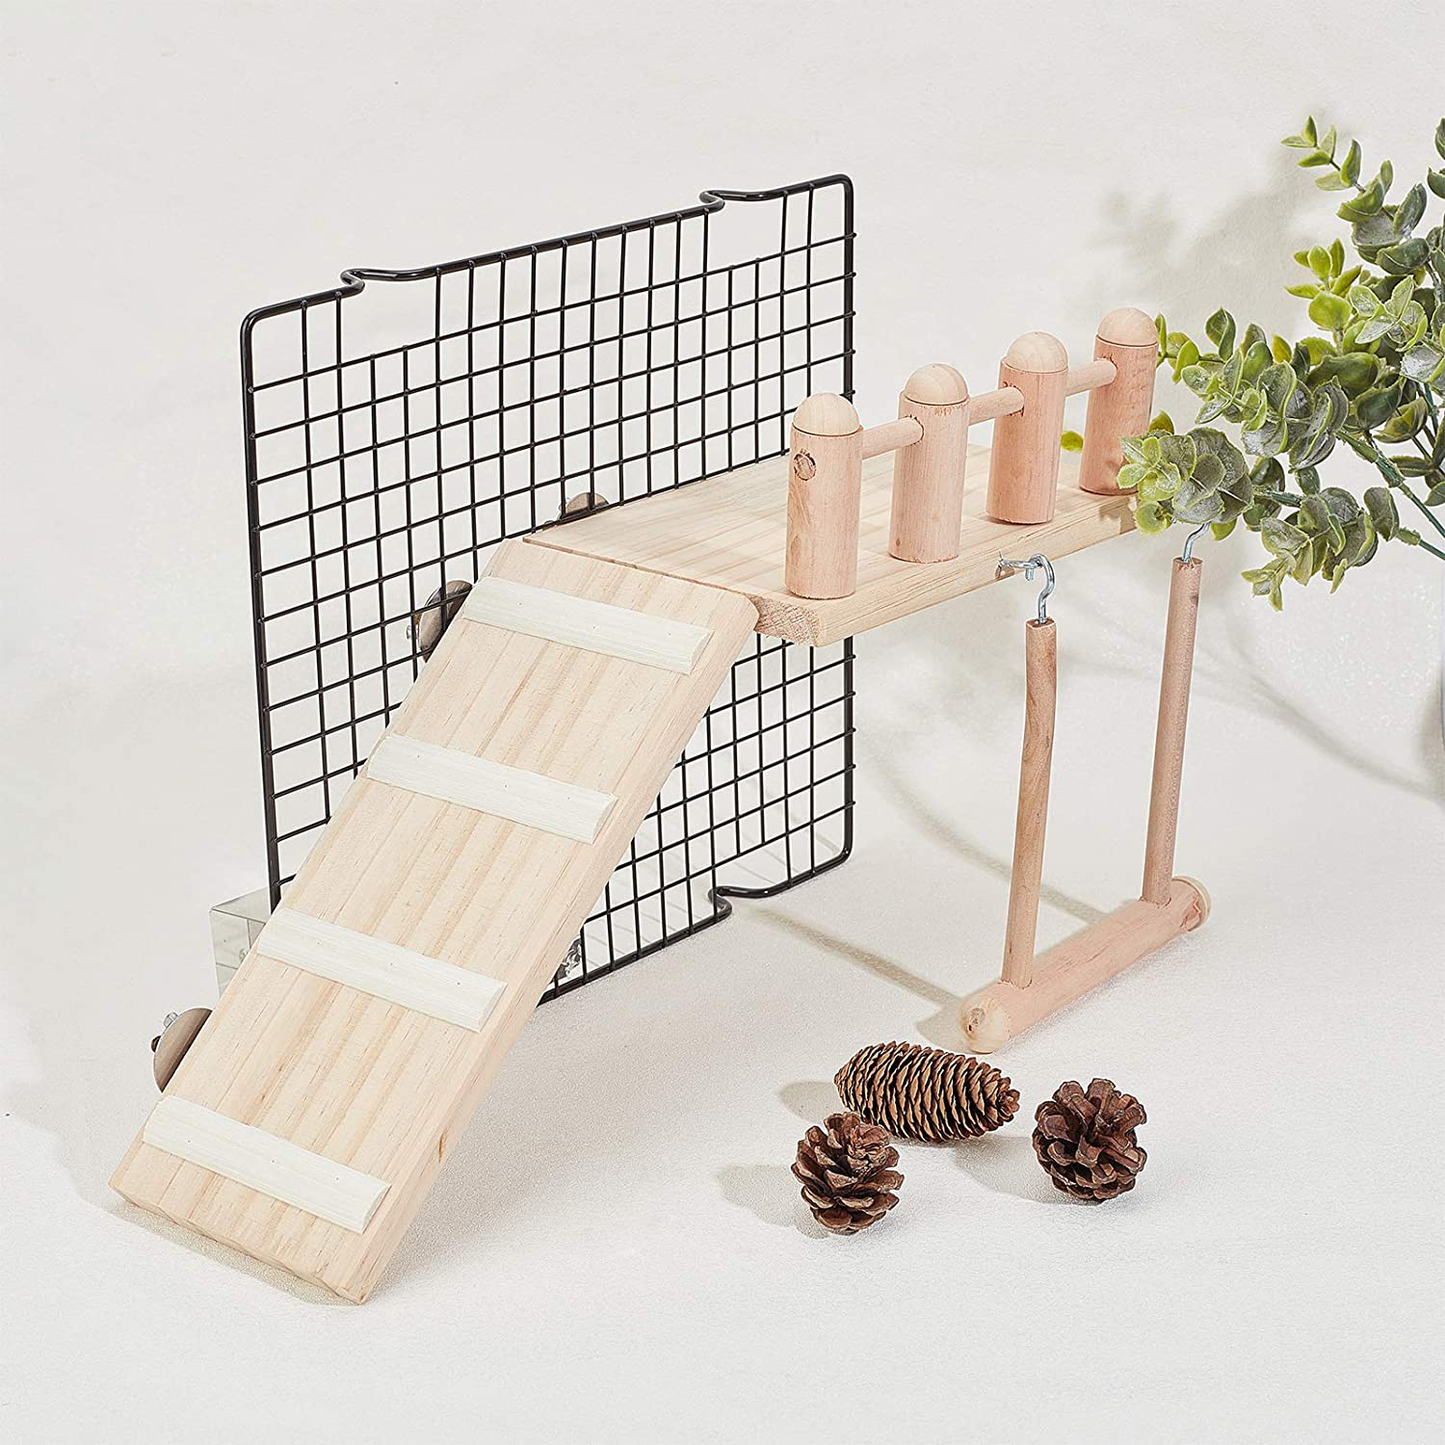 AHANDMAKER Bird Perches Cage Toys Kit, Bird Wooden Play Gyms Stands with Climbing Ladder for Baby Lovebird, Hamster and Parrot